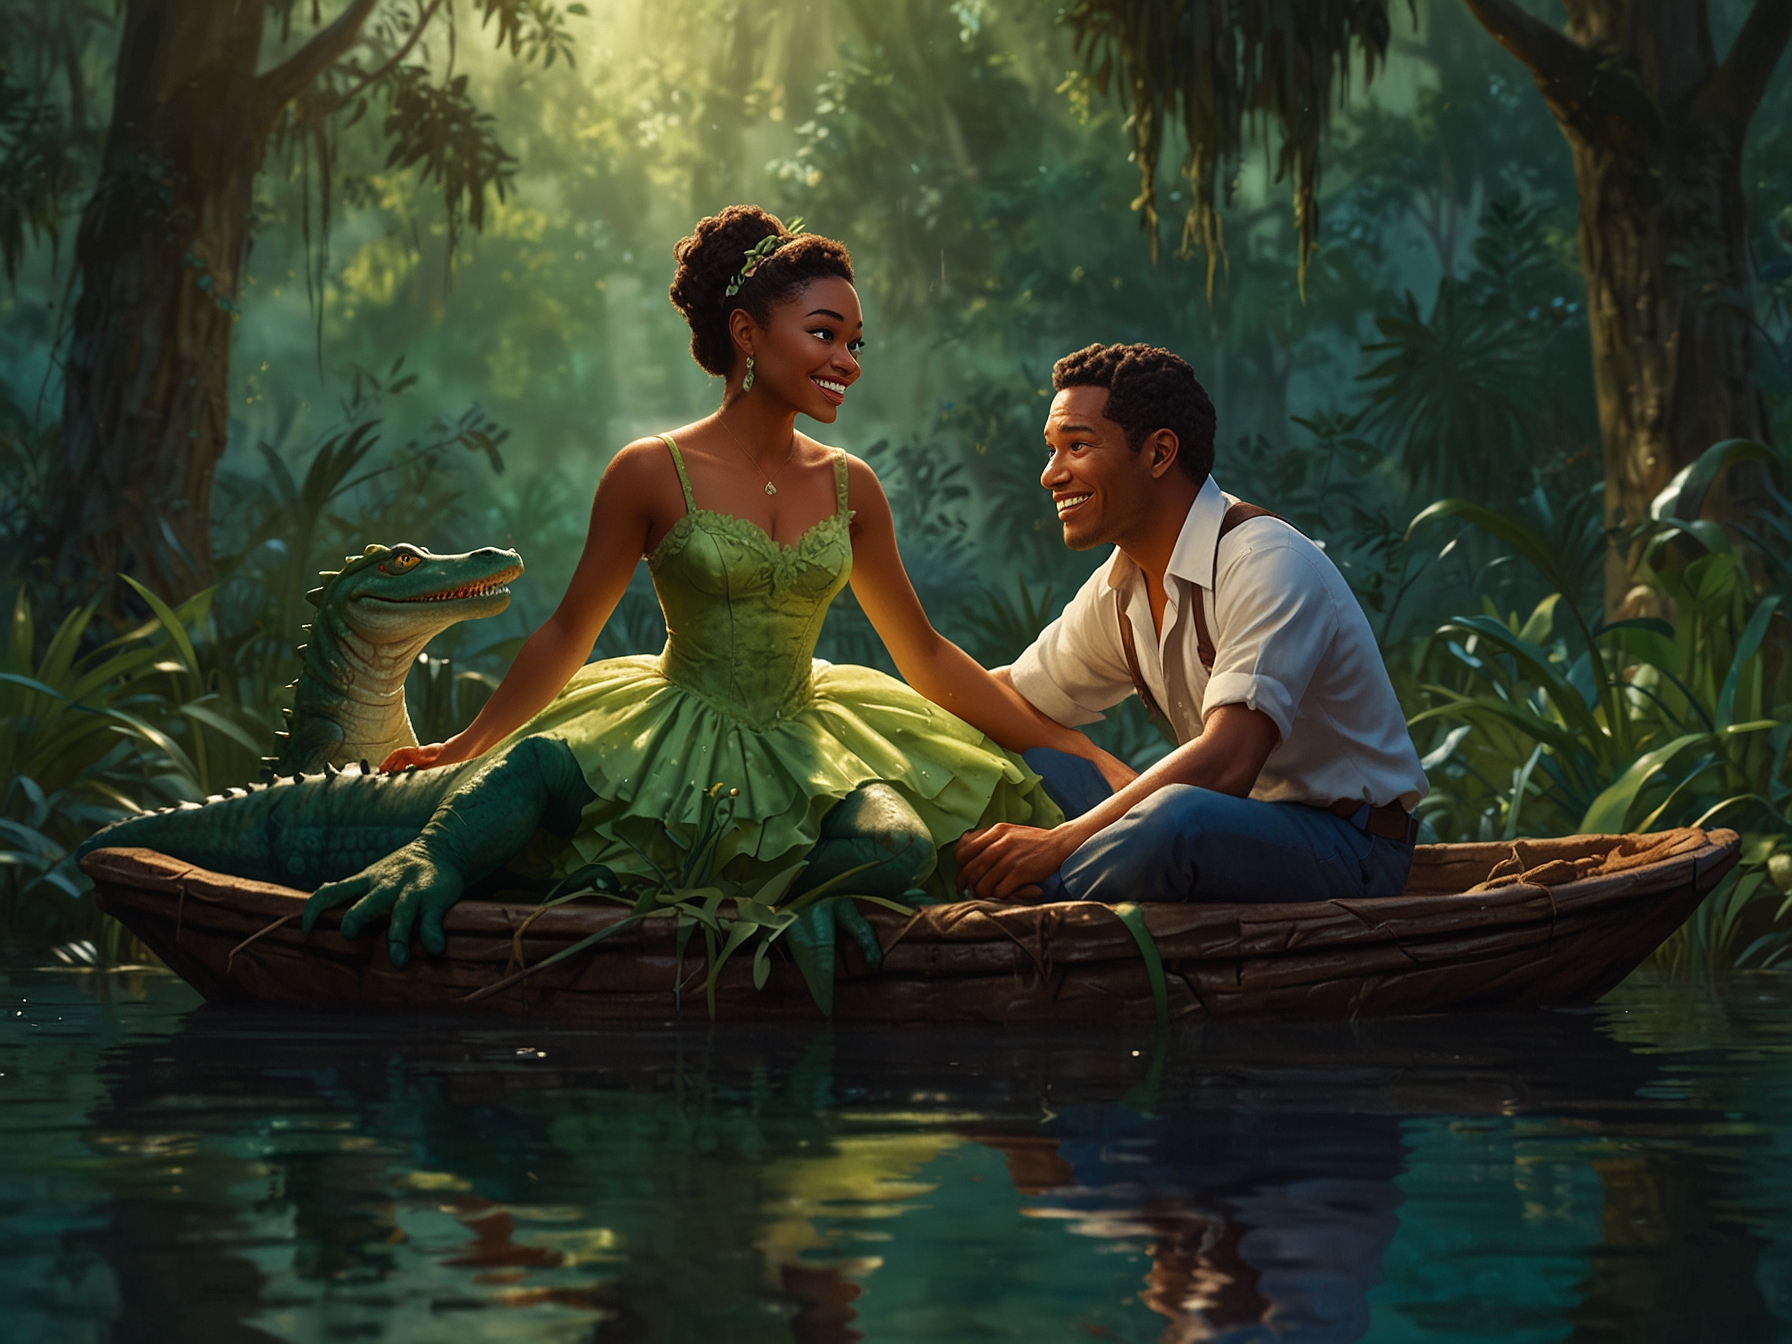 A vibrant scene from Tiana’s Bayou Adventure showcases lifelike animatronics of Tiana and Louis the alligator in a lush, swampy bayou setting, capturing the essence of New Orleans culture.